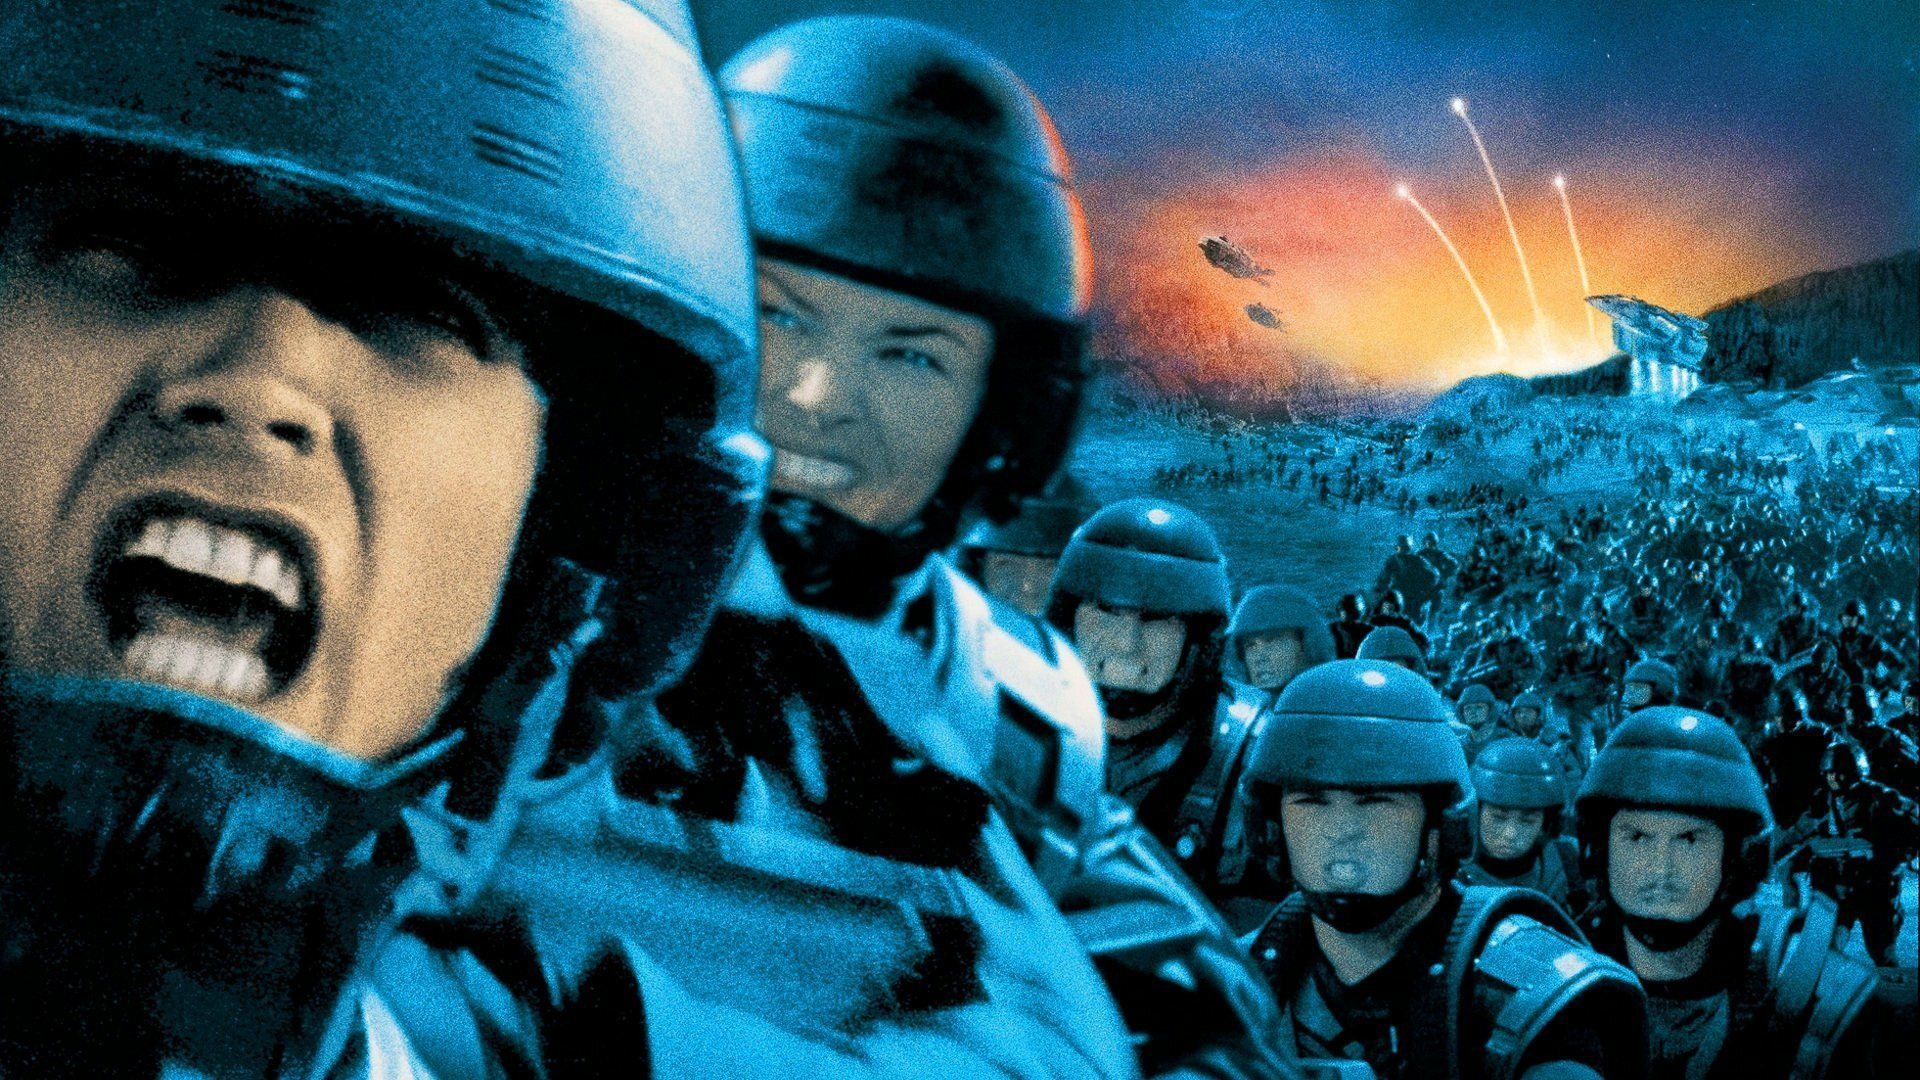 Starship Troopers Wallpaper Free Starship Troopers Background